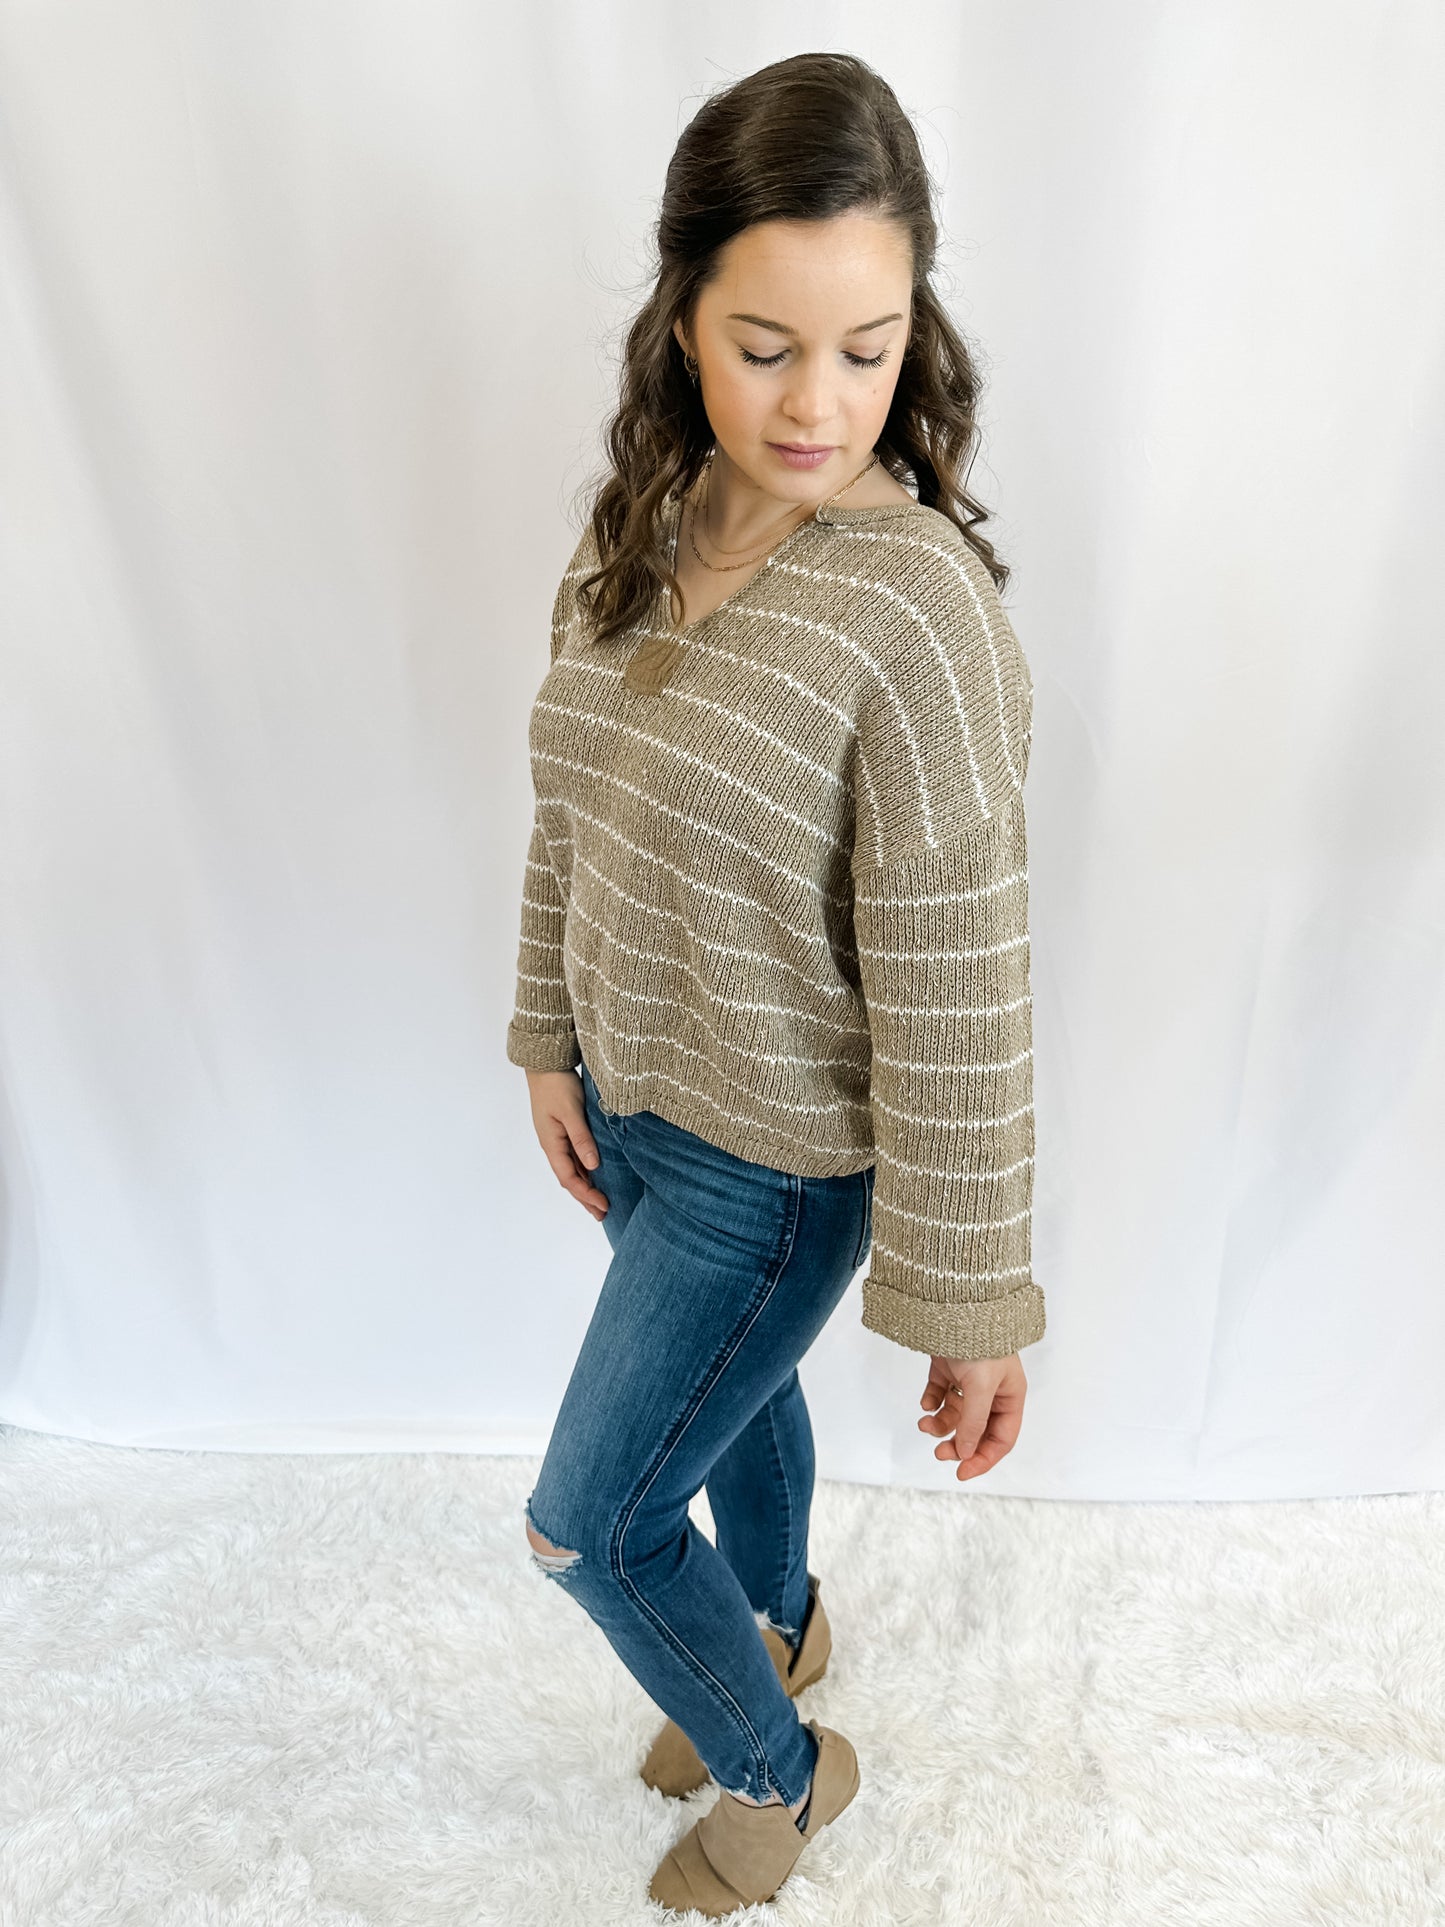 Better Days Ahead Knit Top